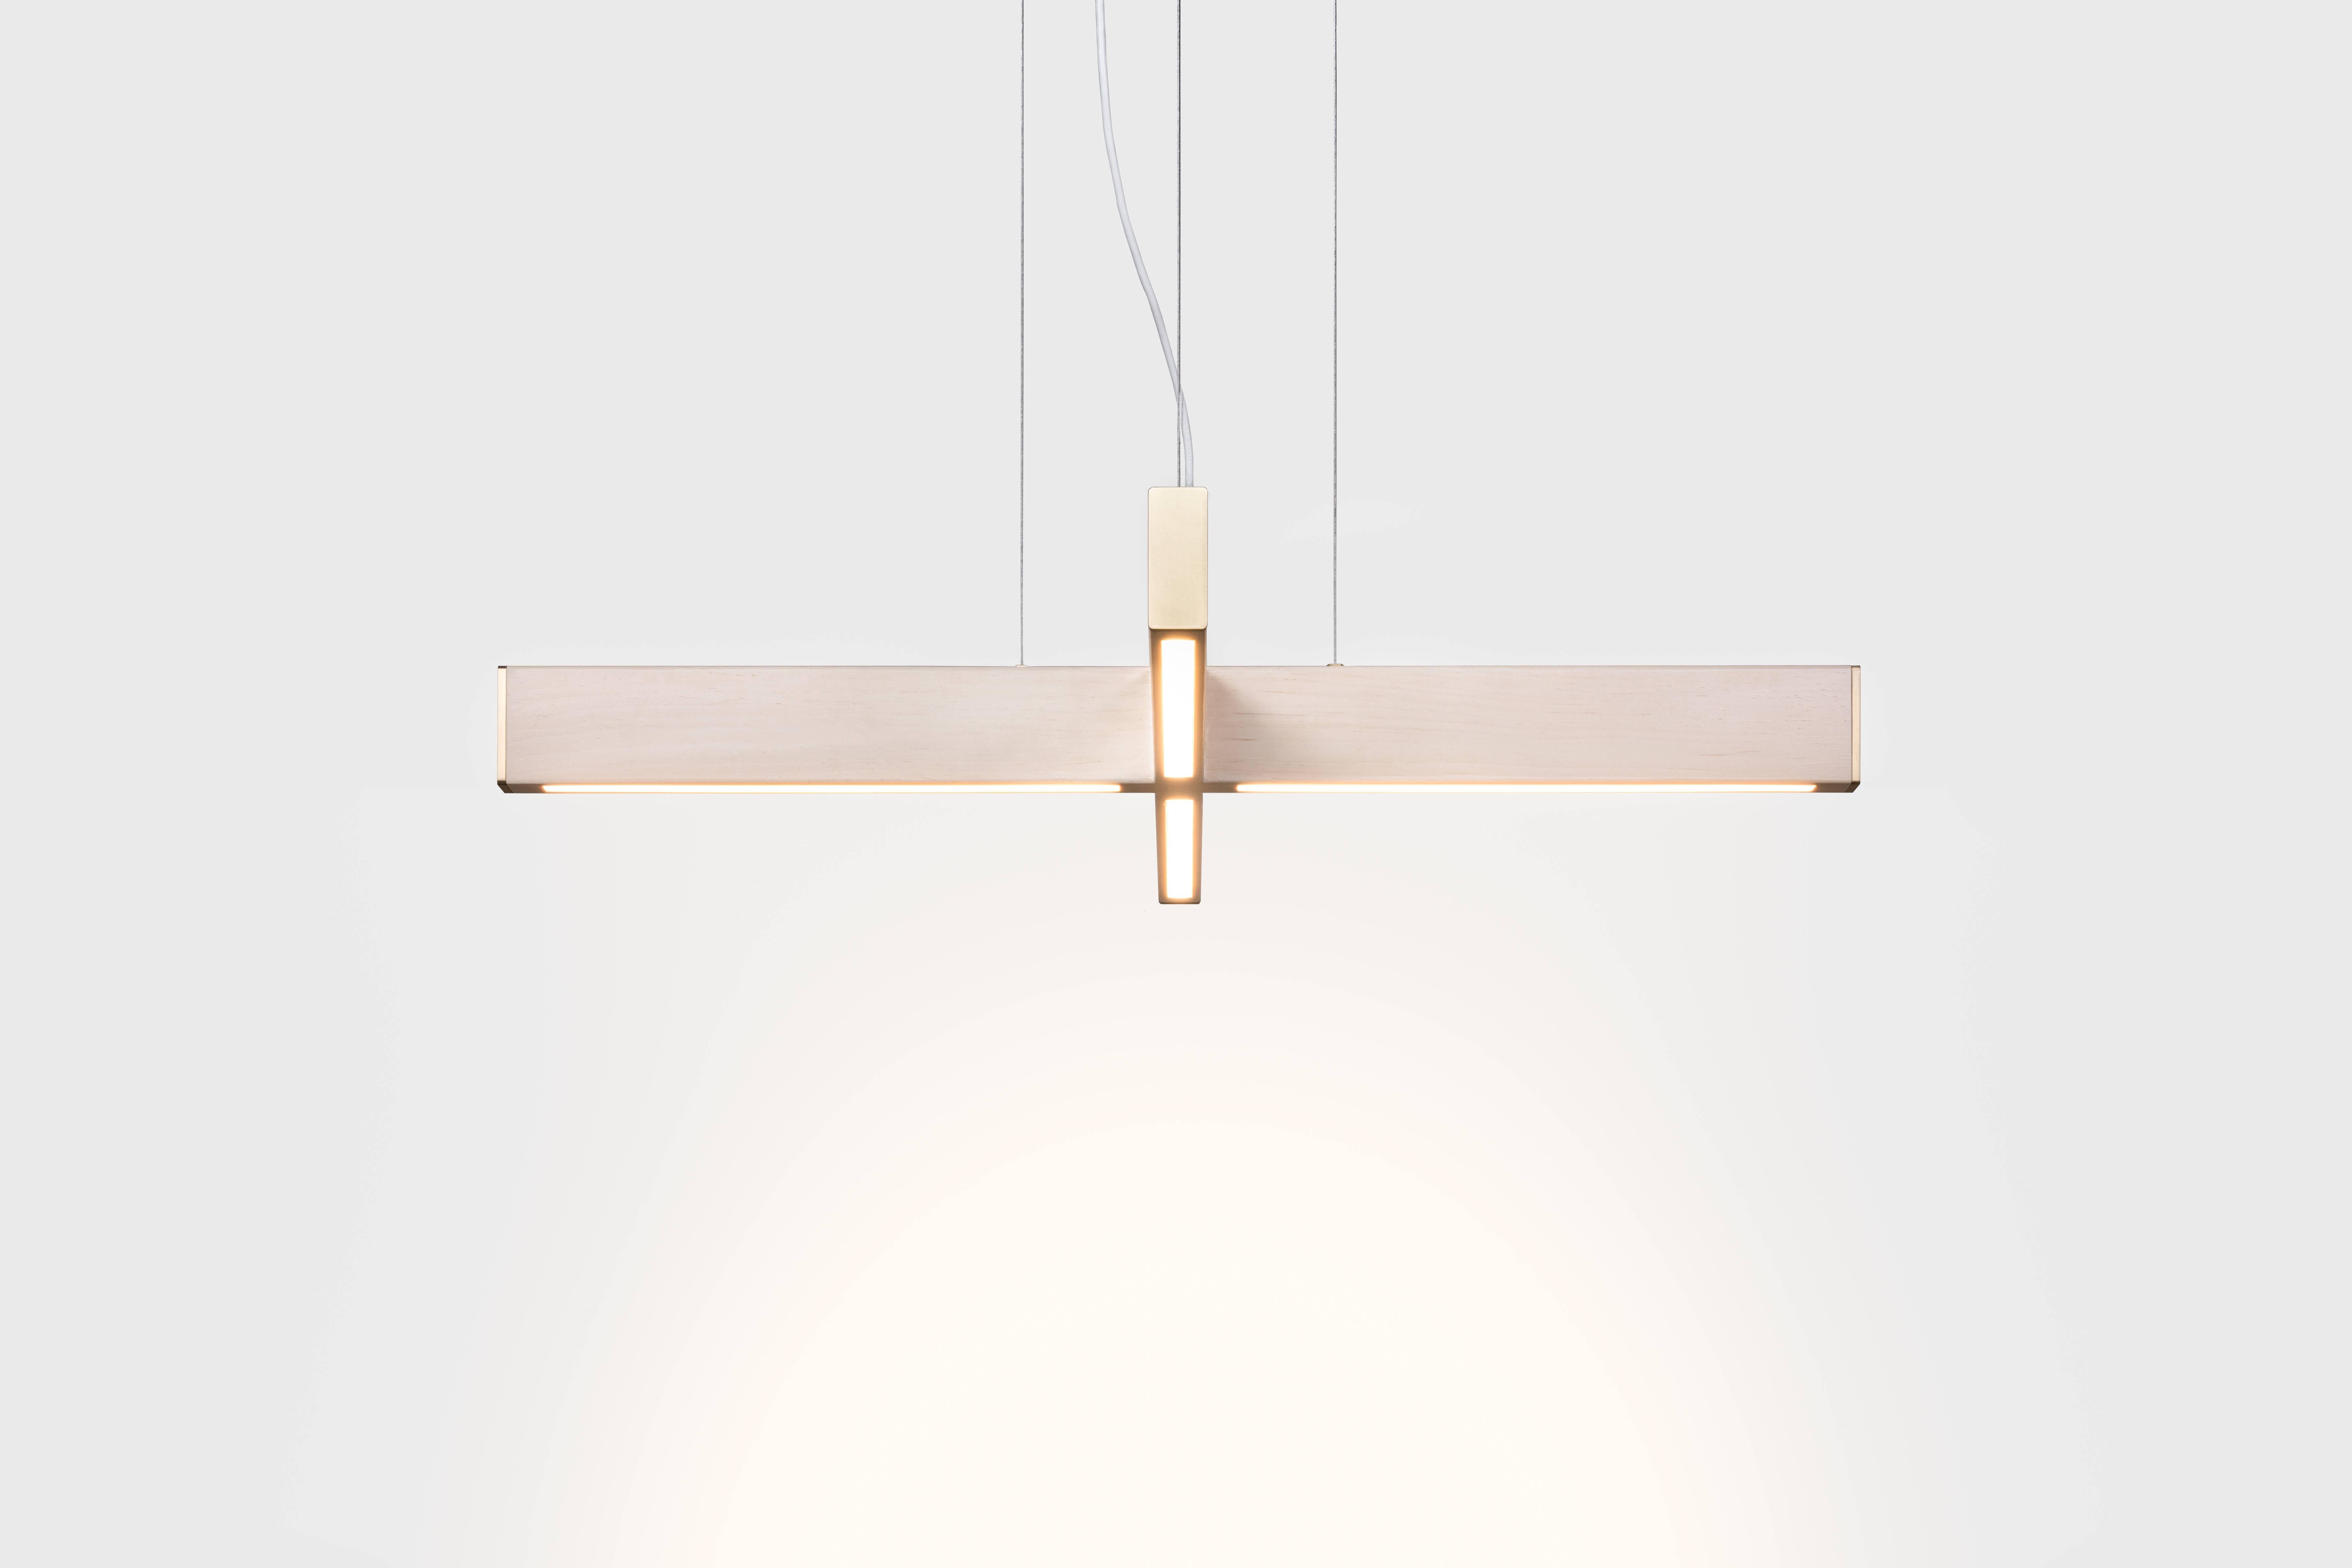 The 2x4 Plus Pendant expands on our classic 2x4 pendant, exploring new relationships through the intersection of the wood bodies. Minimal in form, the Plus Pendant is still large in its presence.

Custom finishes and sizes available upon request.